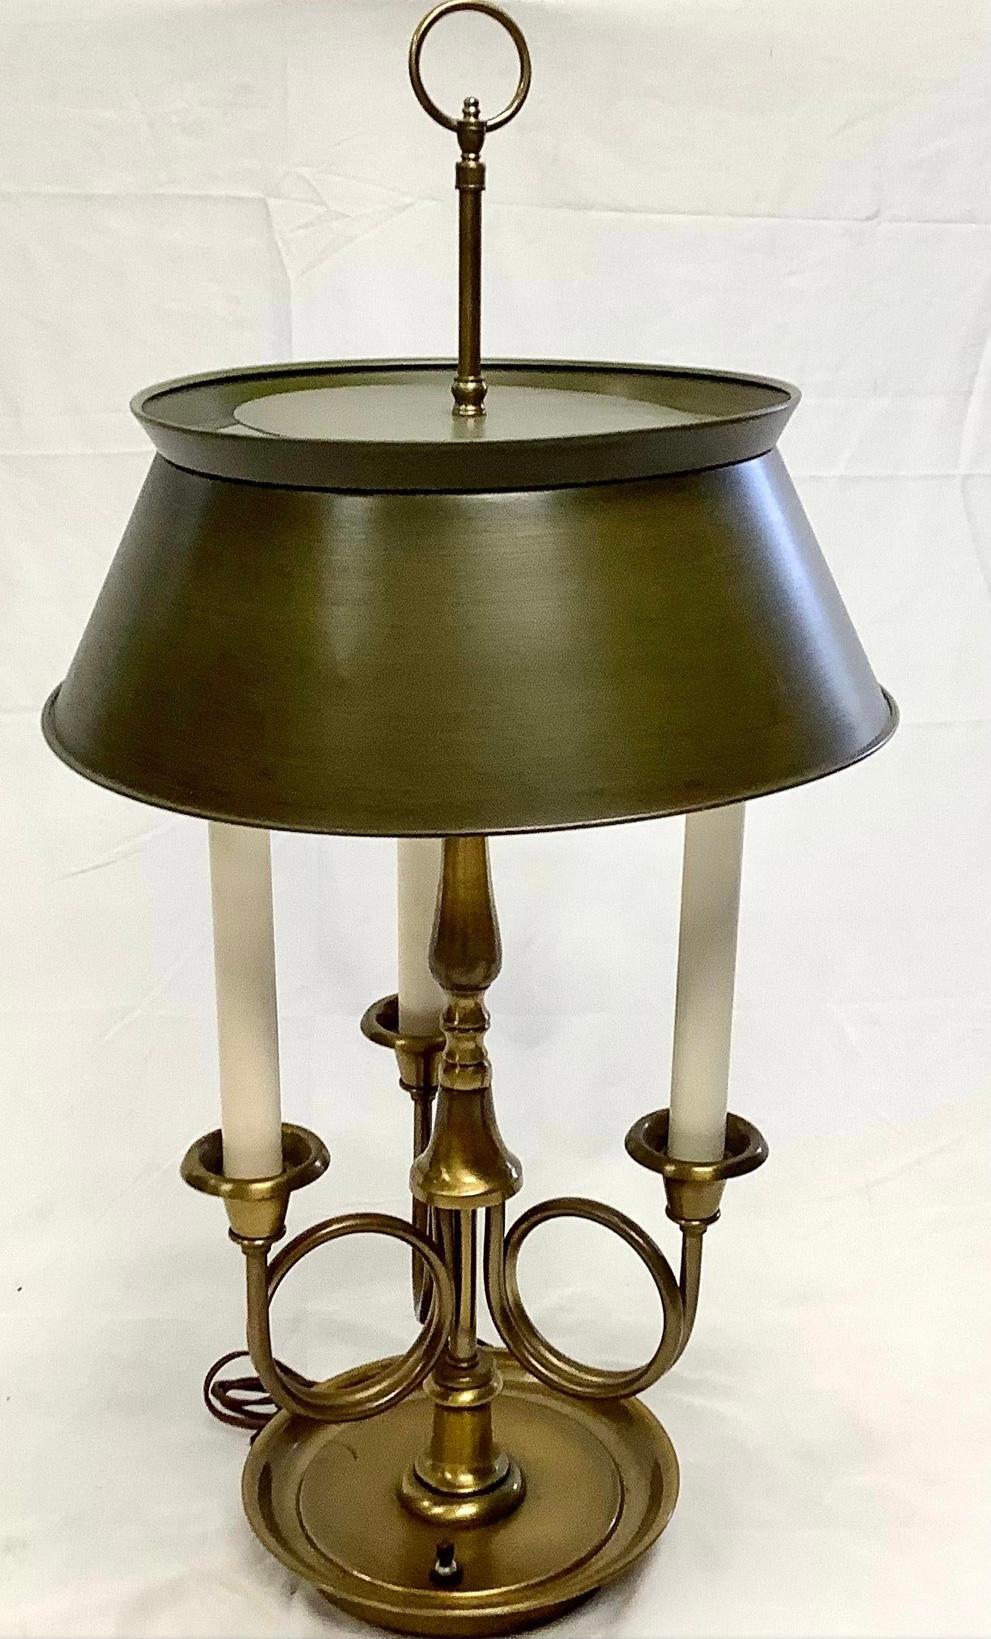 Fredrick Cooper French style brass Bouillotte lamp with dark green tole shade. Lamp has two light sockets and three faux candle holders. Age appropriate wear. In working condition.

Measures: 8